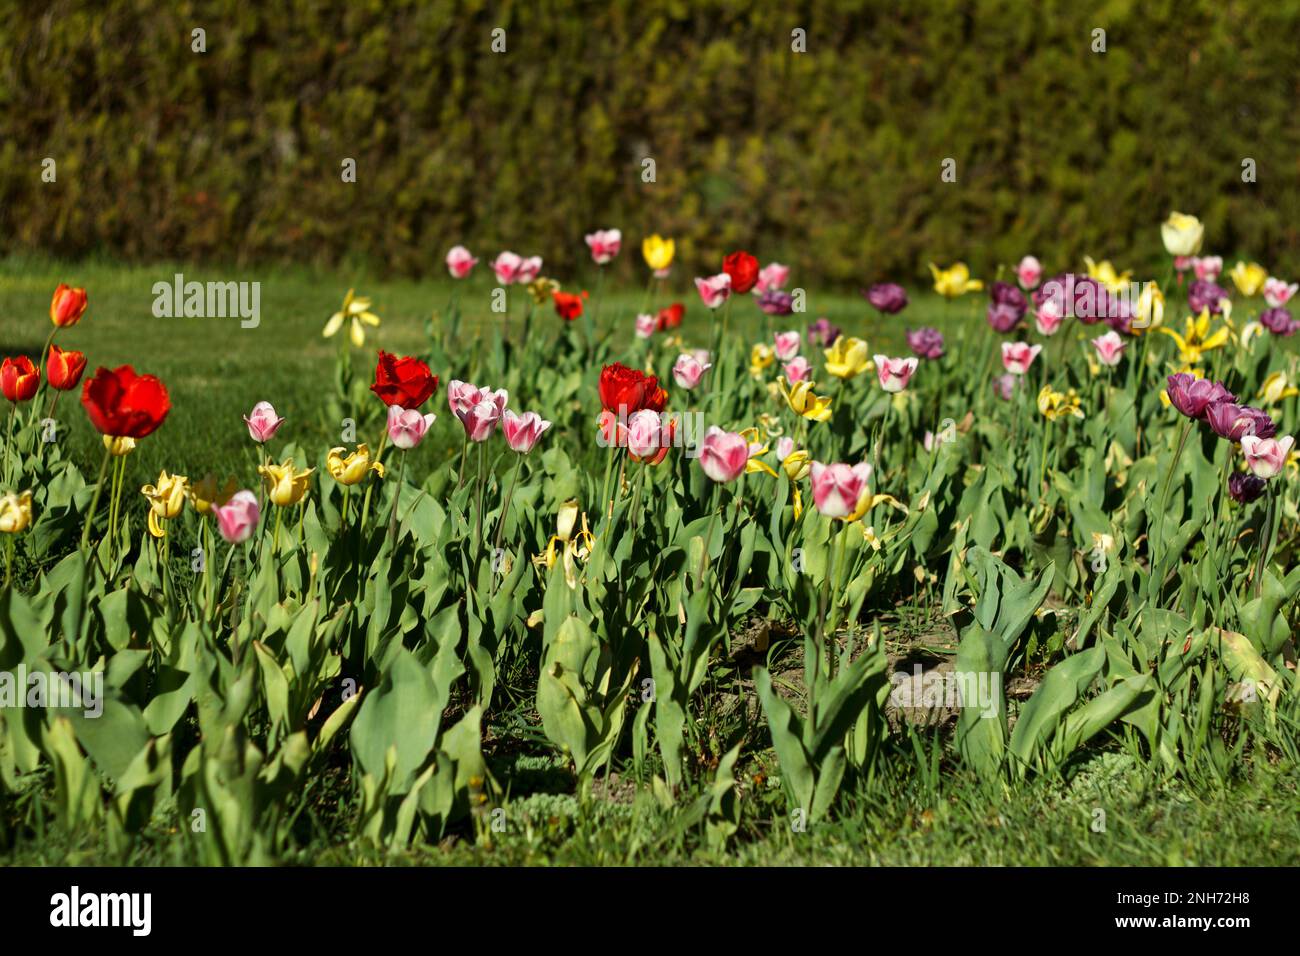 Landscape of multicolored flowering tulips in spring garden against the backdrop of yew in suny day Stock Photo